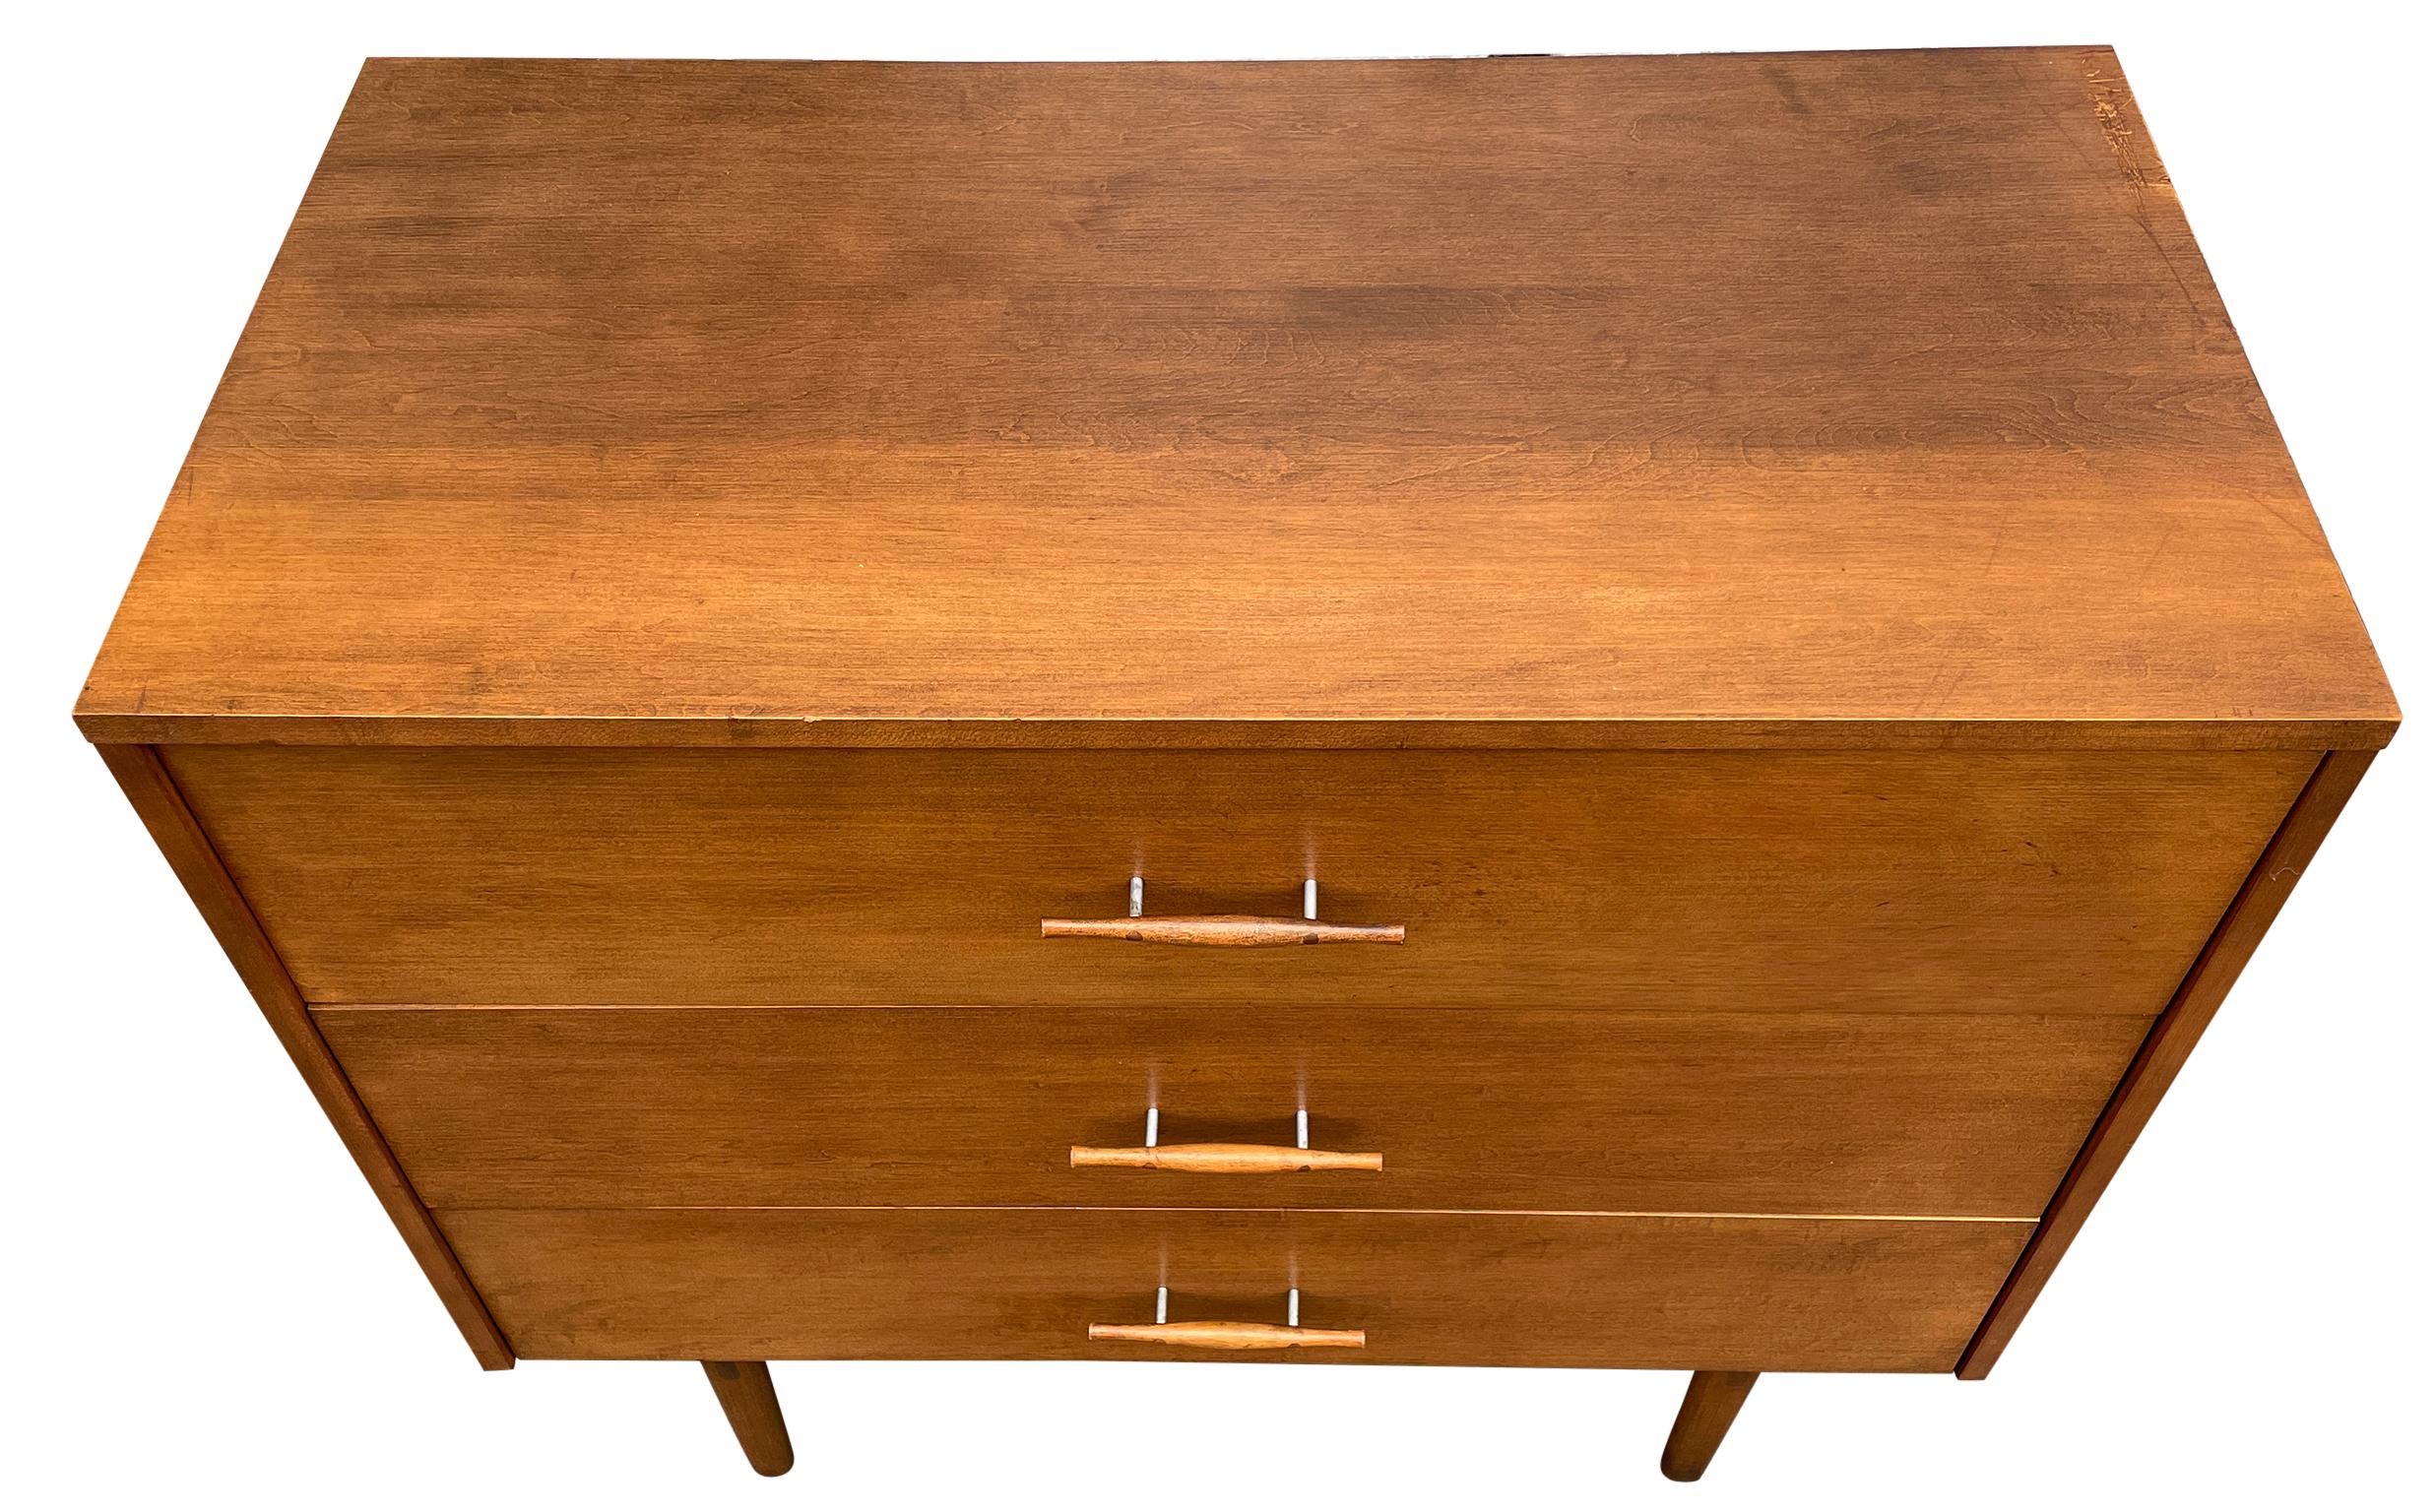 Vintage midcentury Paul McCobb 3-drawer dresser Planner Group #1508. Beautiful dresser by Paul McCobb circa 1950s Planner Group, 3 drawer, solid maple, Walnut finish, Wood handle pulls, Wood legs base. Clean inside and out all drawers slide smooth.